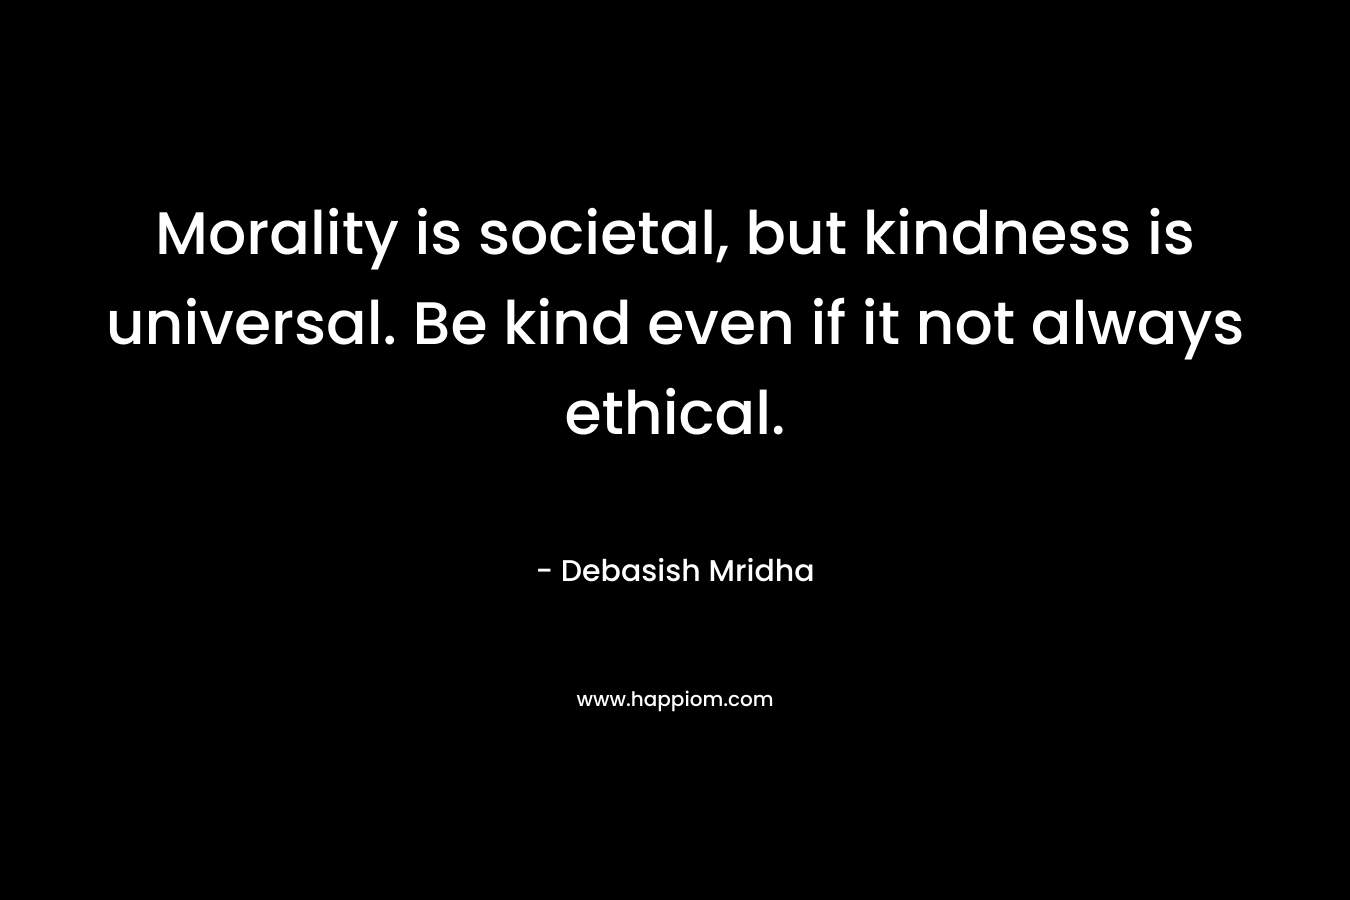 Morality is societal, but kindness is universal. Be kind even if it not always ethical.